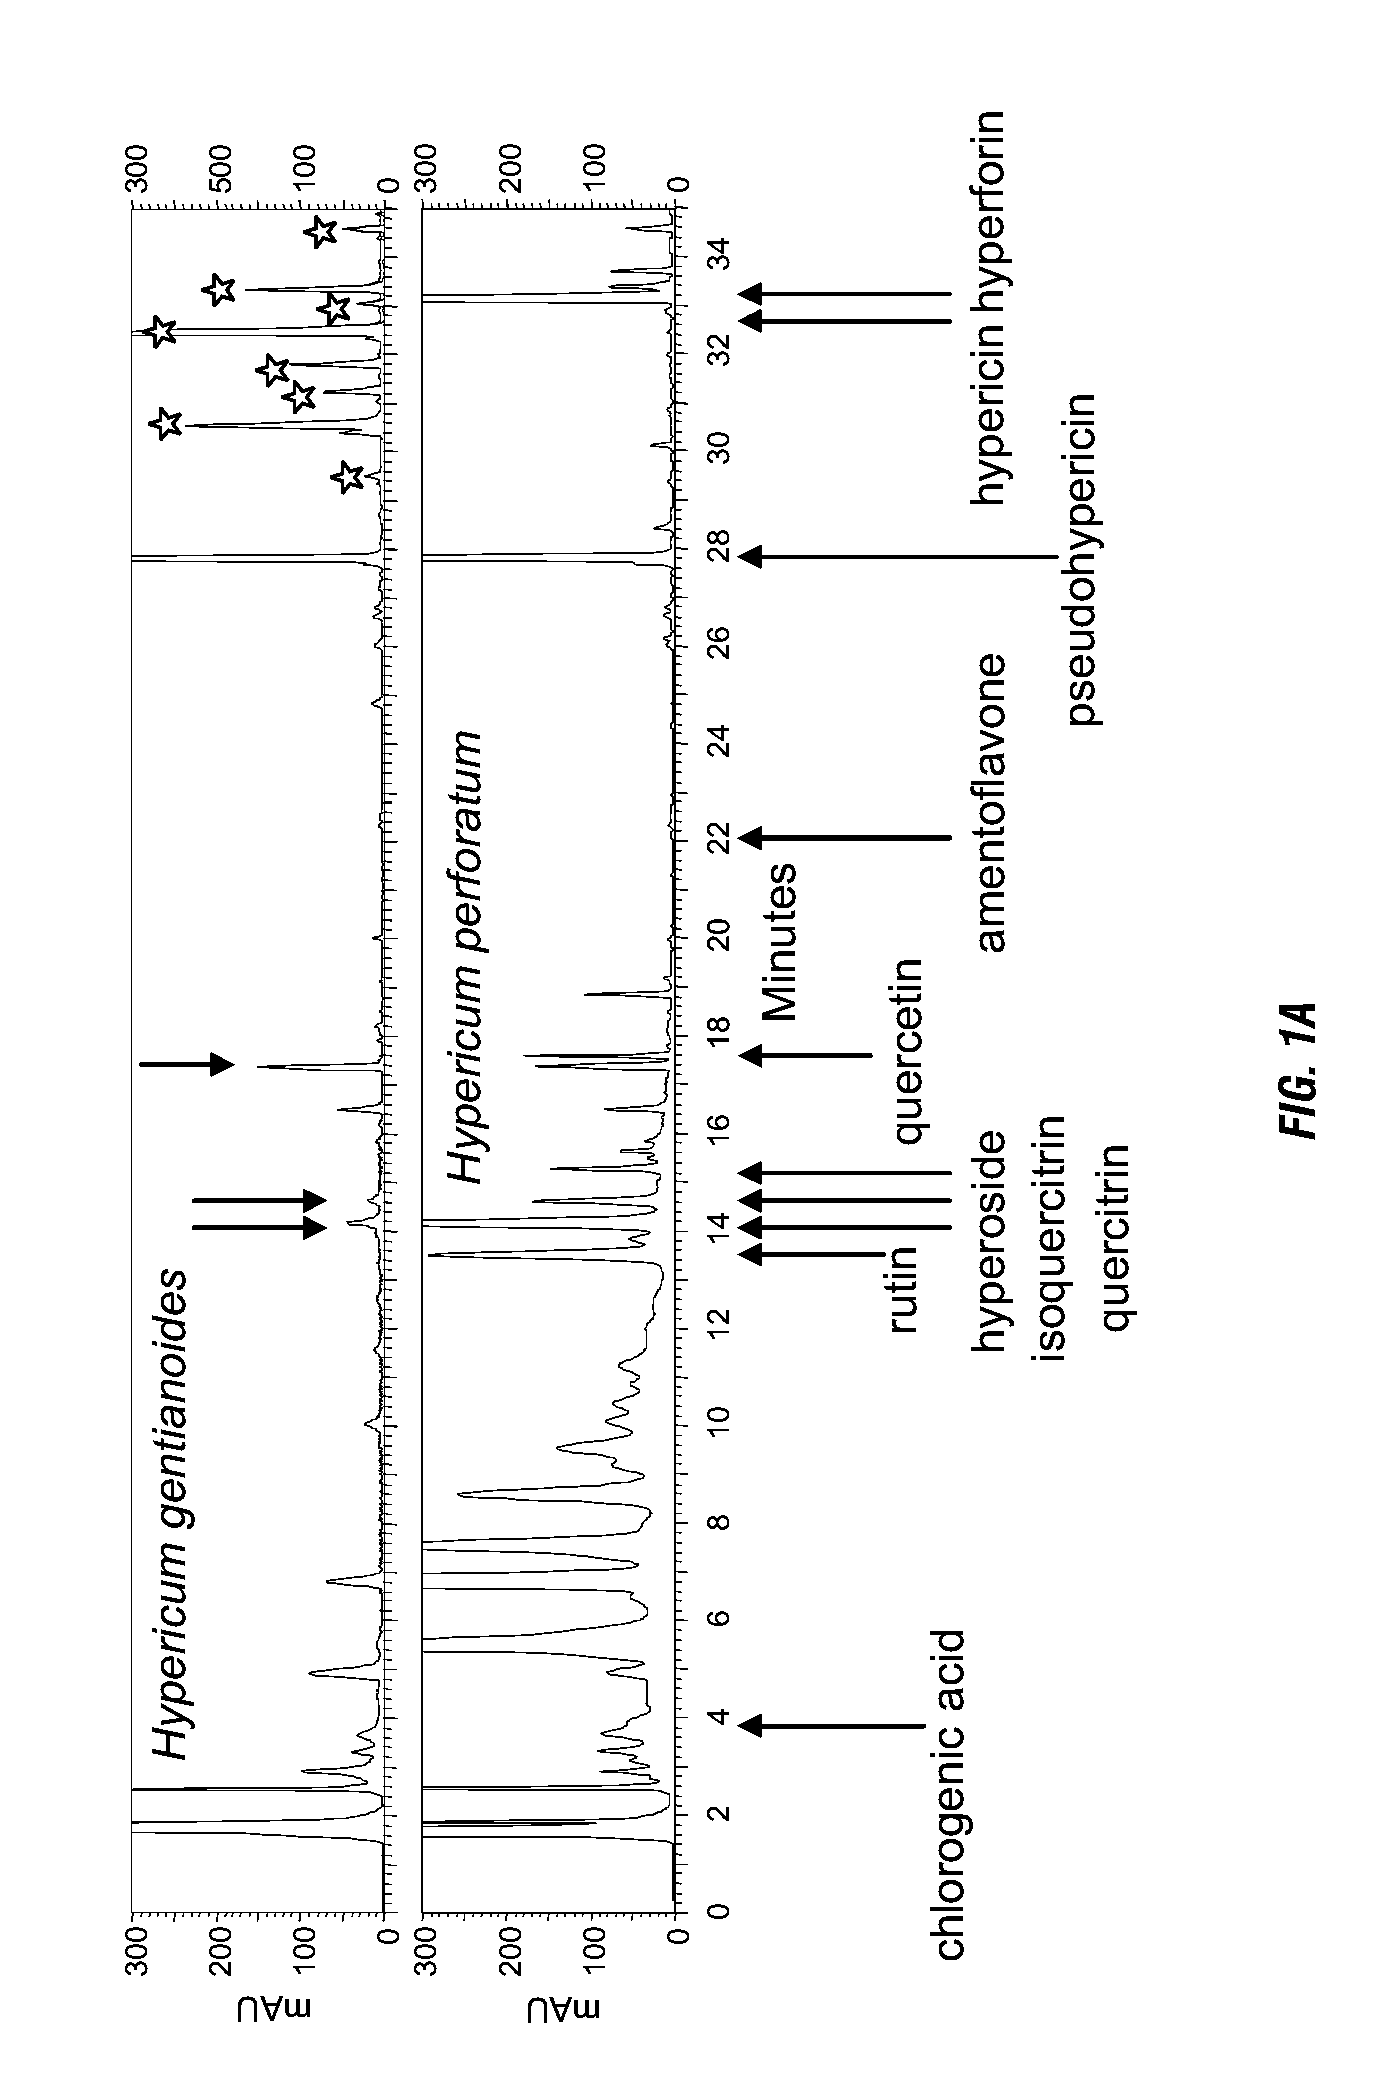 Anti-inflammatory and anti-HIV compositions and methods of use